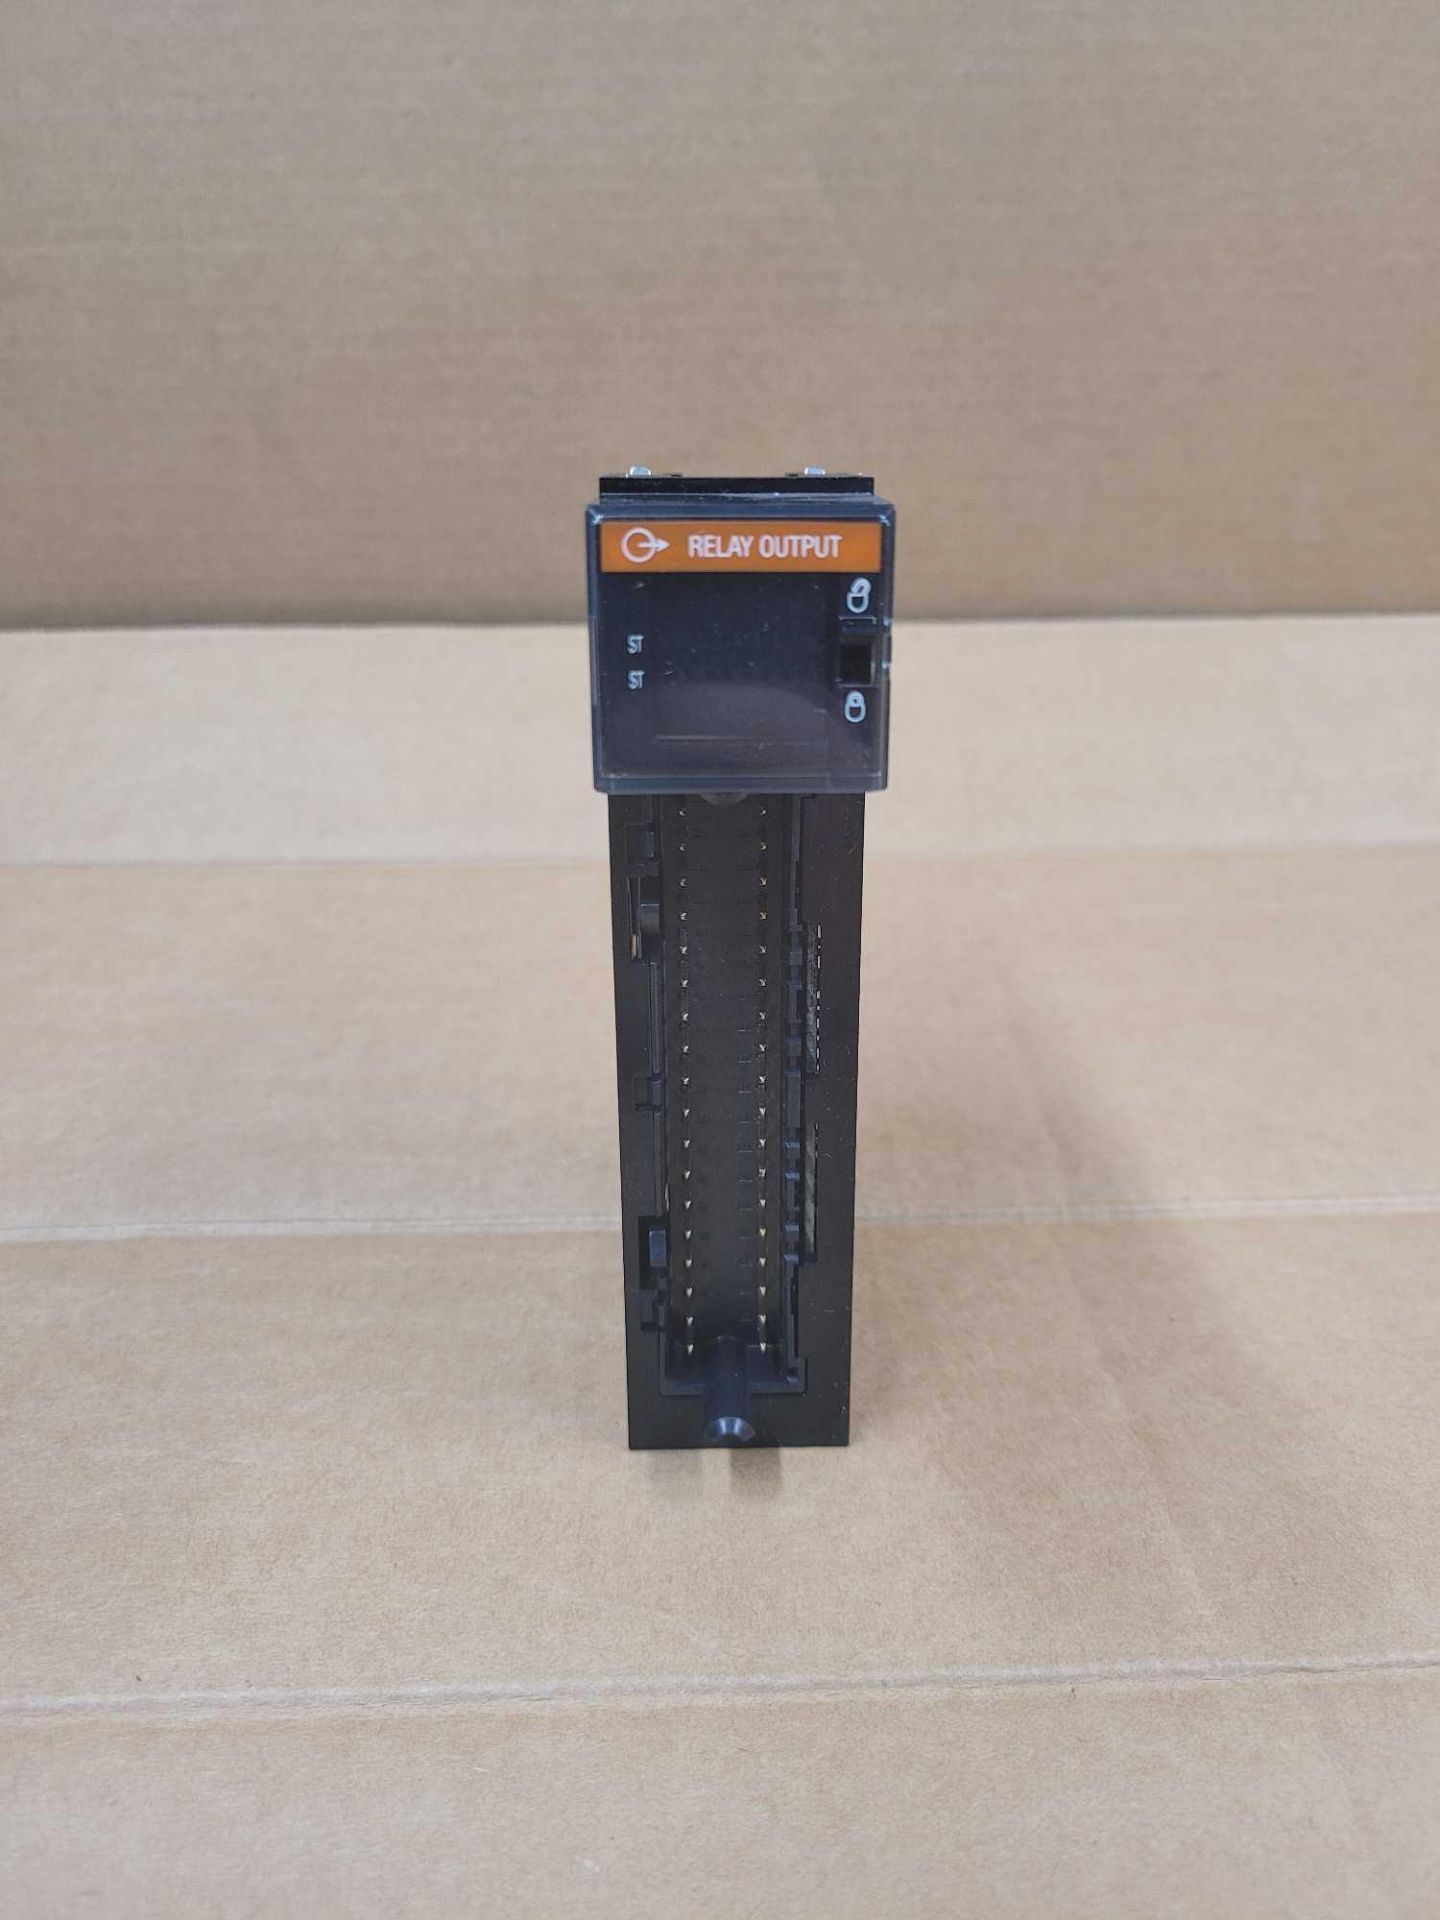 ALLEN BRADLEY 1756-OW16I / Series A Isolated Relay Output Module  /  Lot Weight: 0.6 lbs